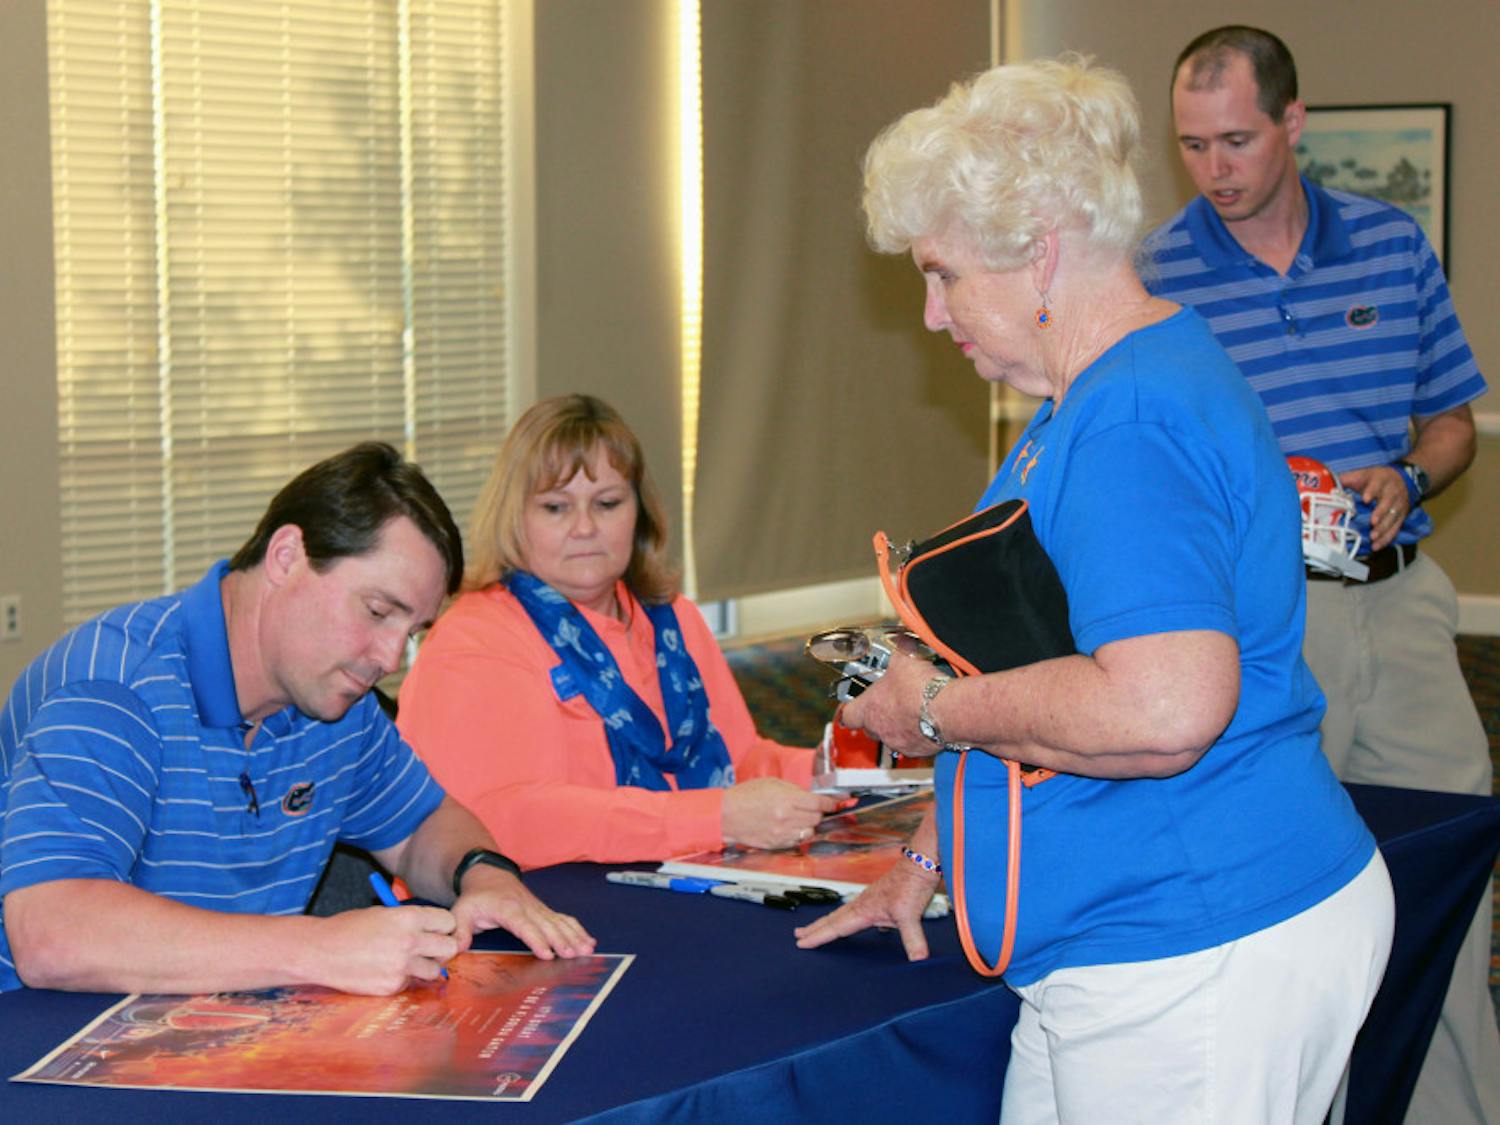 Will Muschamp signs autographs Tuesday afternoon after a press conference at Emerson Hall to discuss his plans for the upcoming season, which begins Aug. 30.